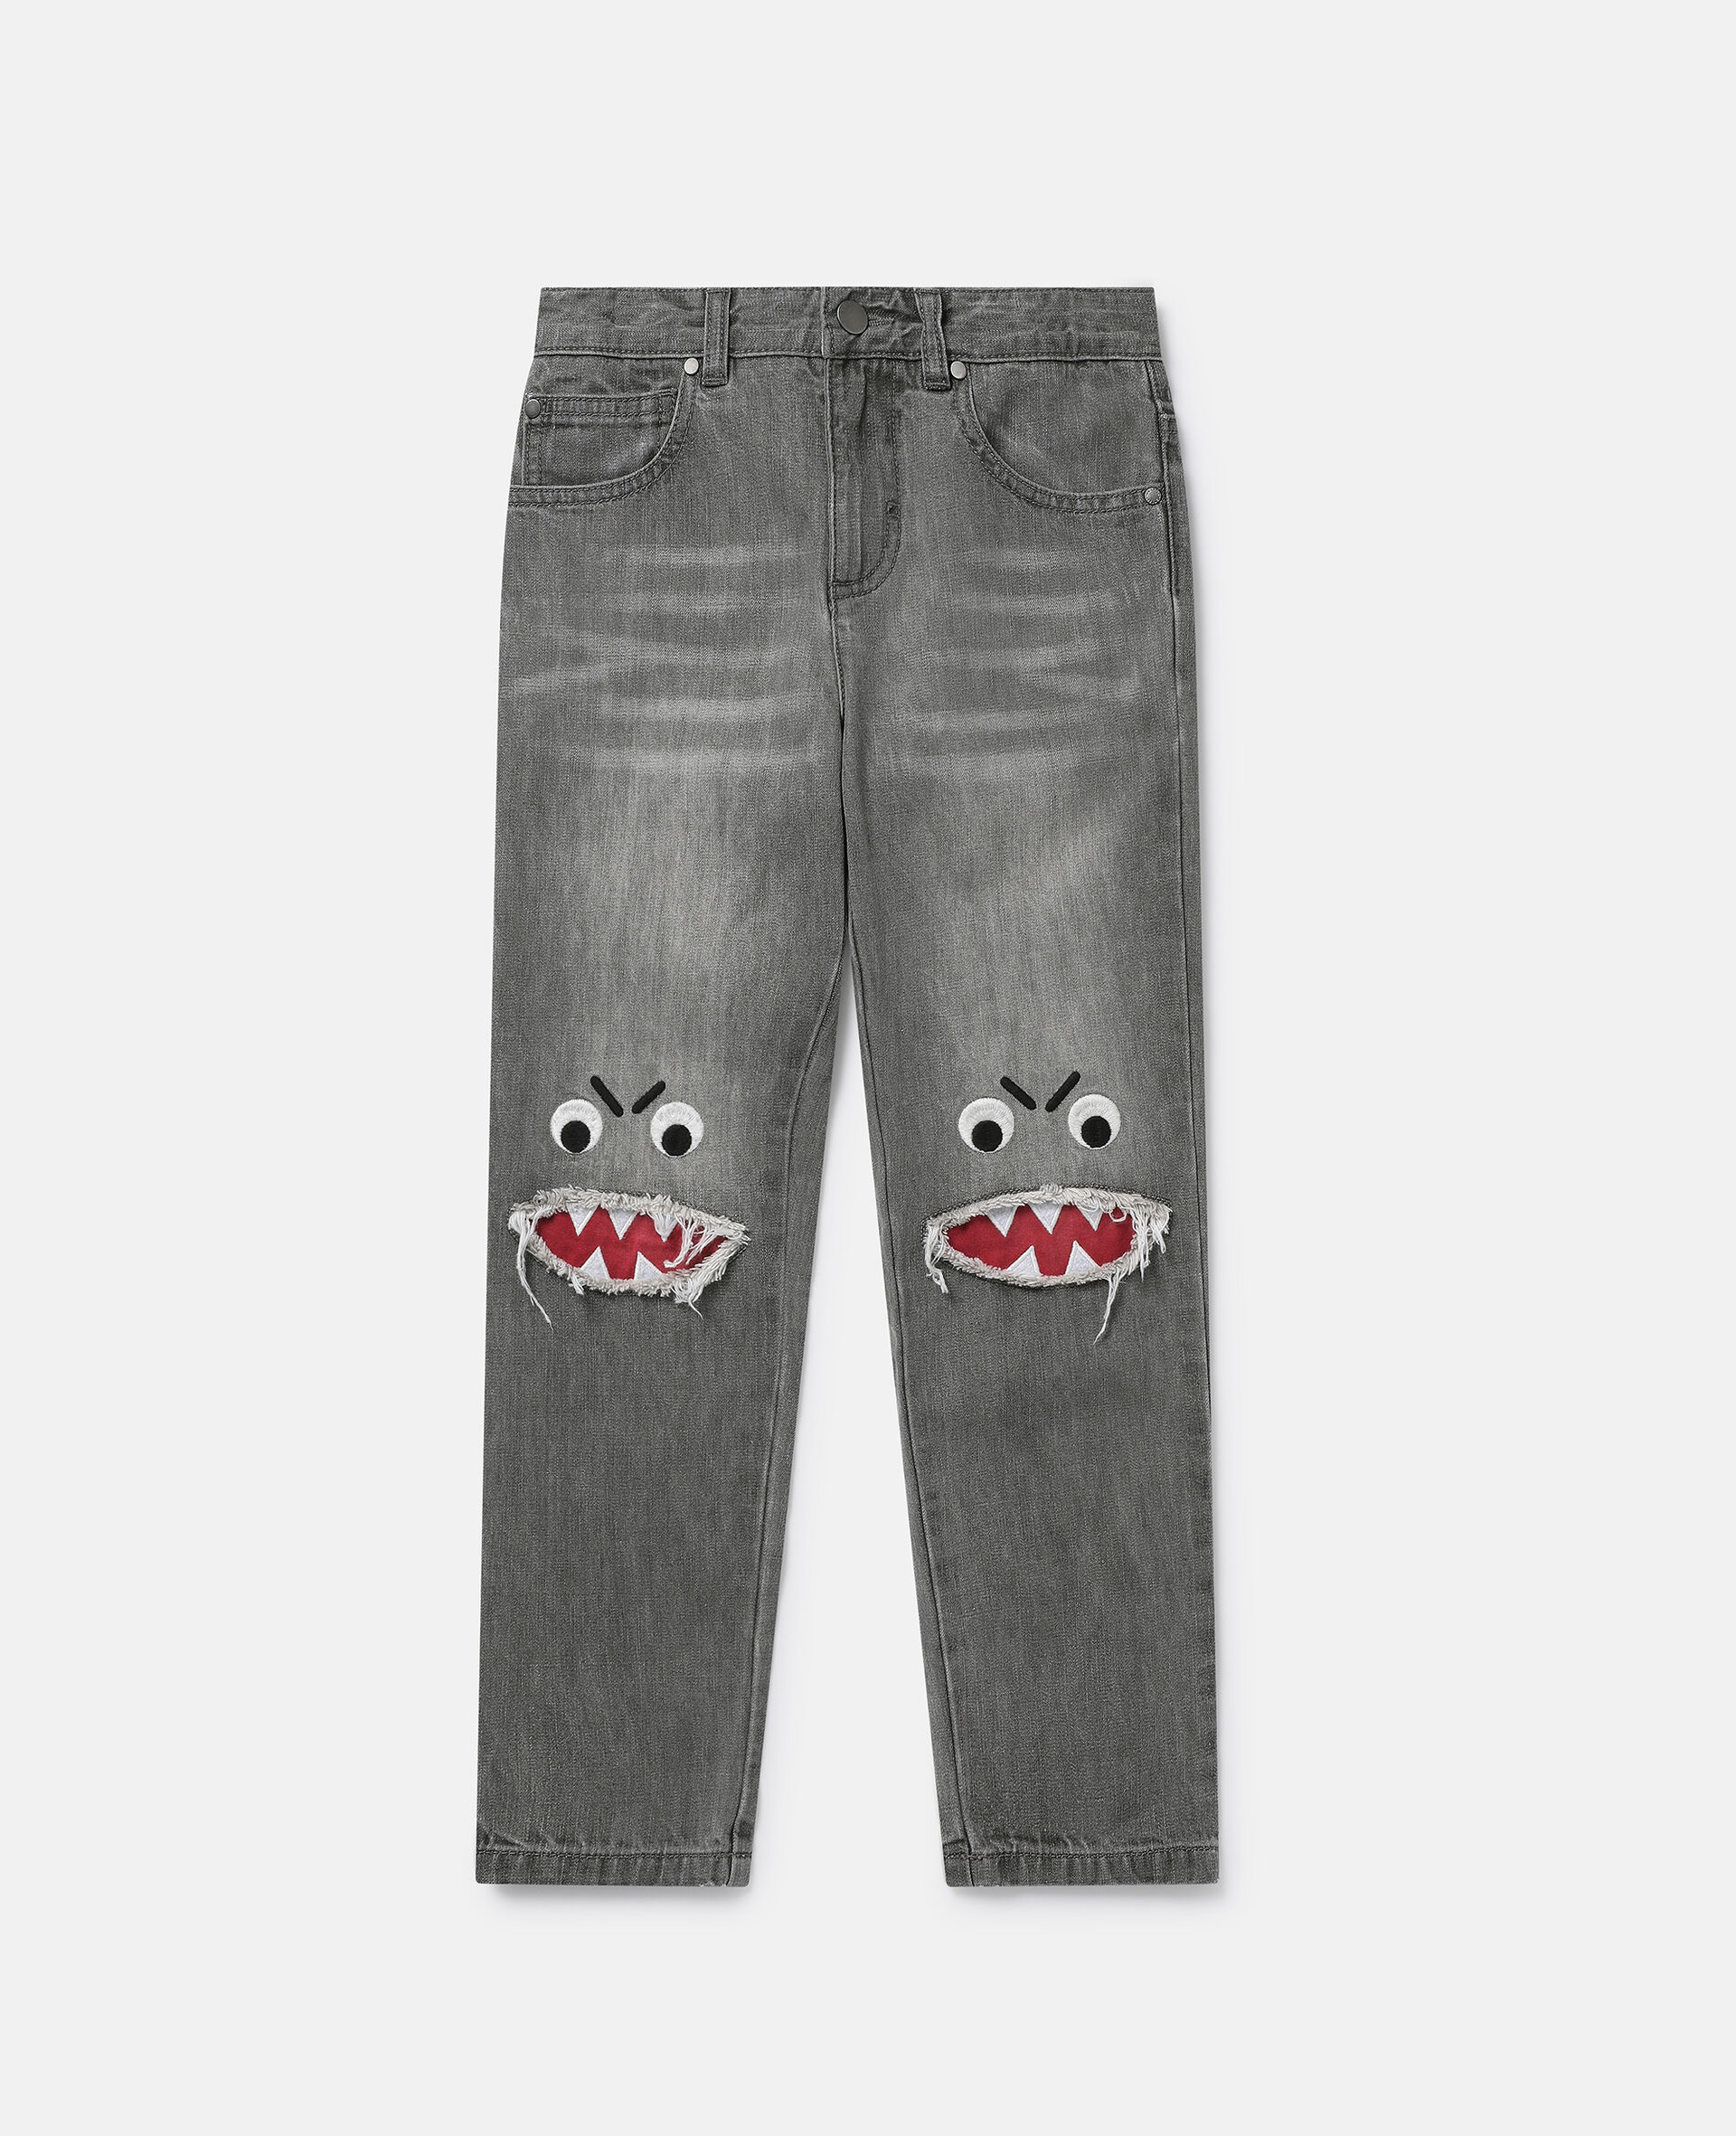 Shark Face Ripped Skinny Jeans-Grey-large image number 0